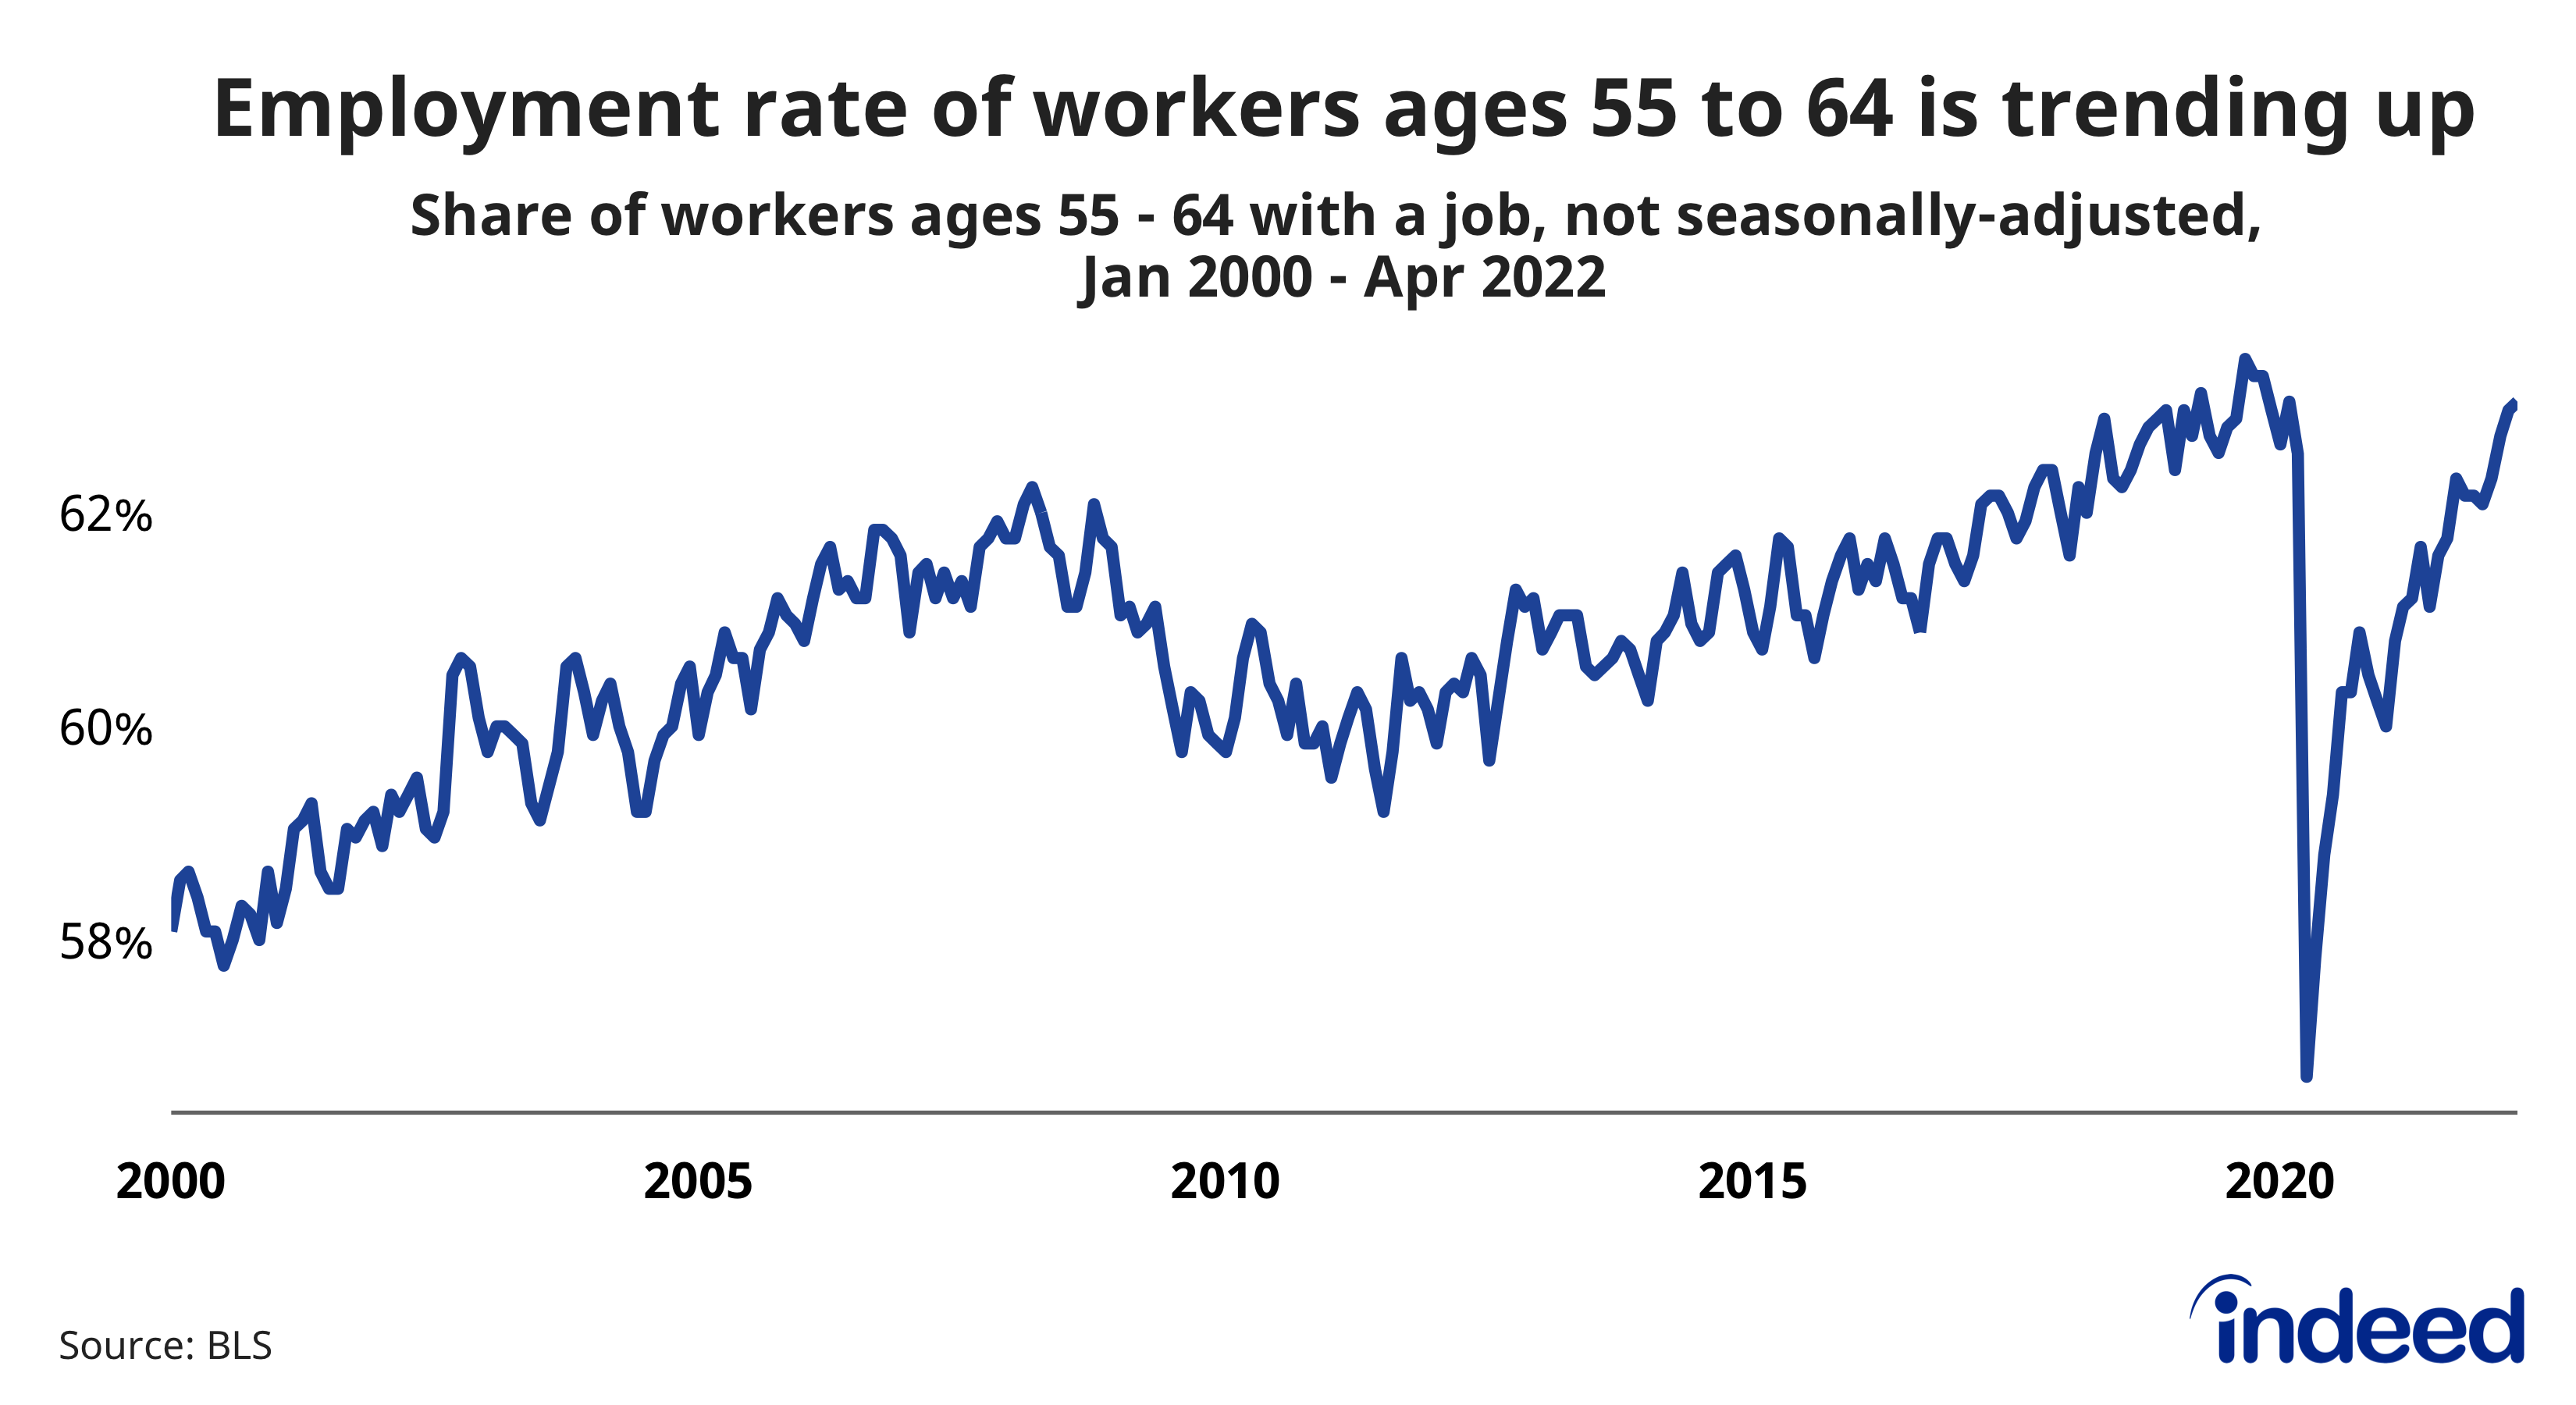 Line chart depicting the share of workers ages 55 to 64 with a job from January 2000 to April 2022.